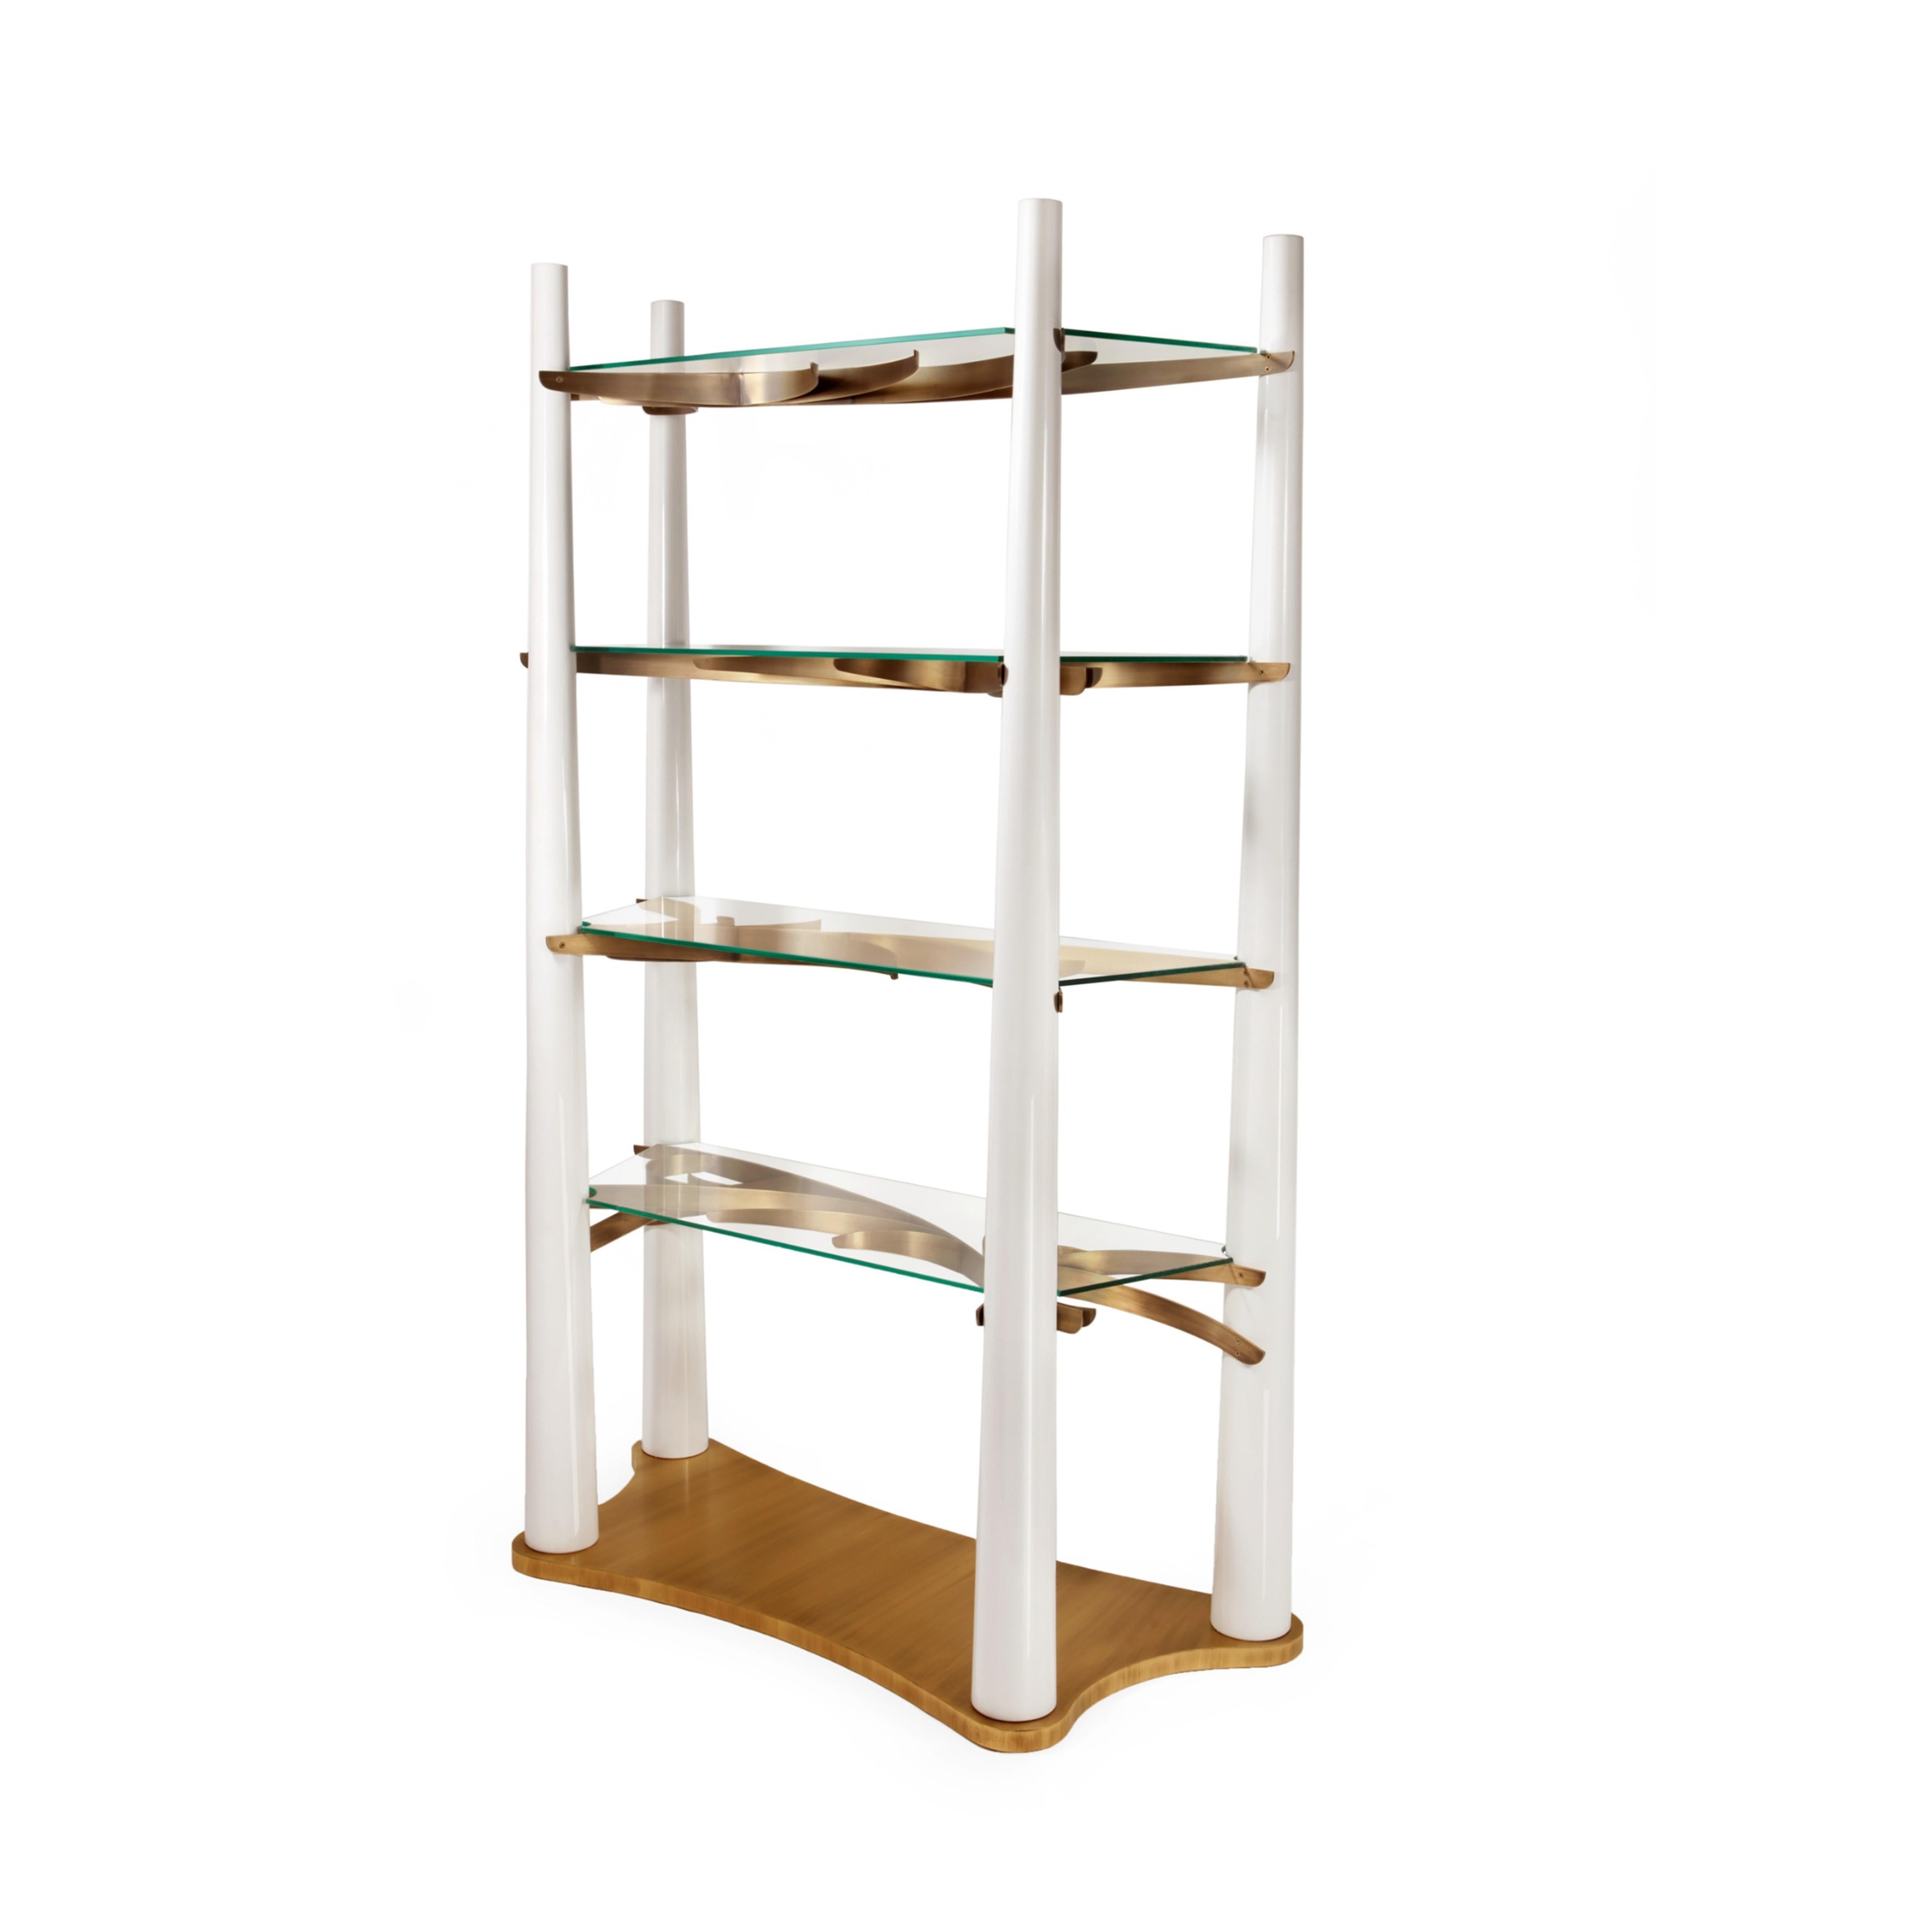 Modern Into The Woods Bookcase, White and Brass, InsidherLand by Joana Santos Barbosa For Sale